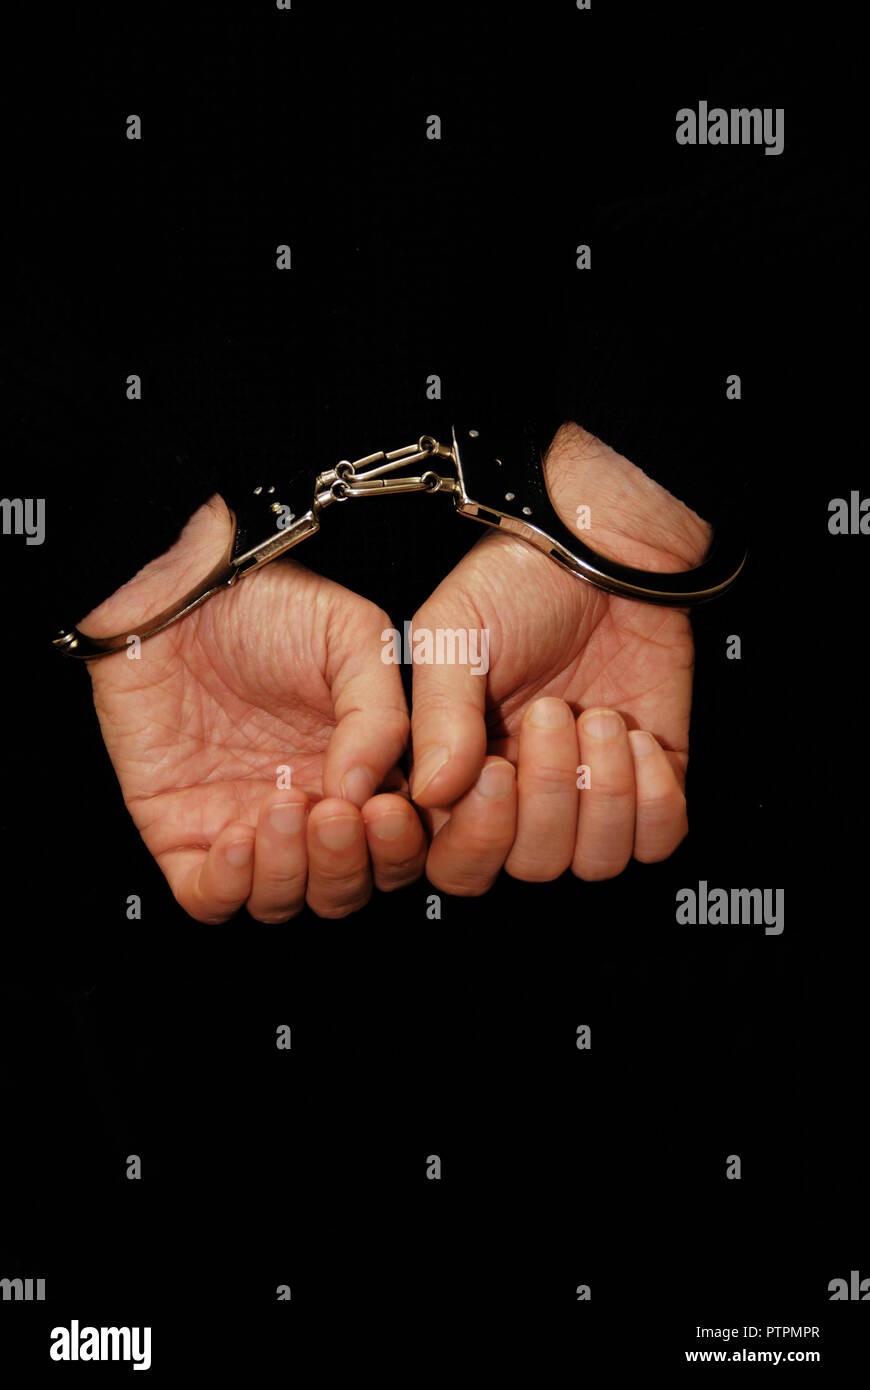 male hands handcuffed, concept for criminal arrested Stock Photo